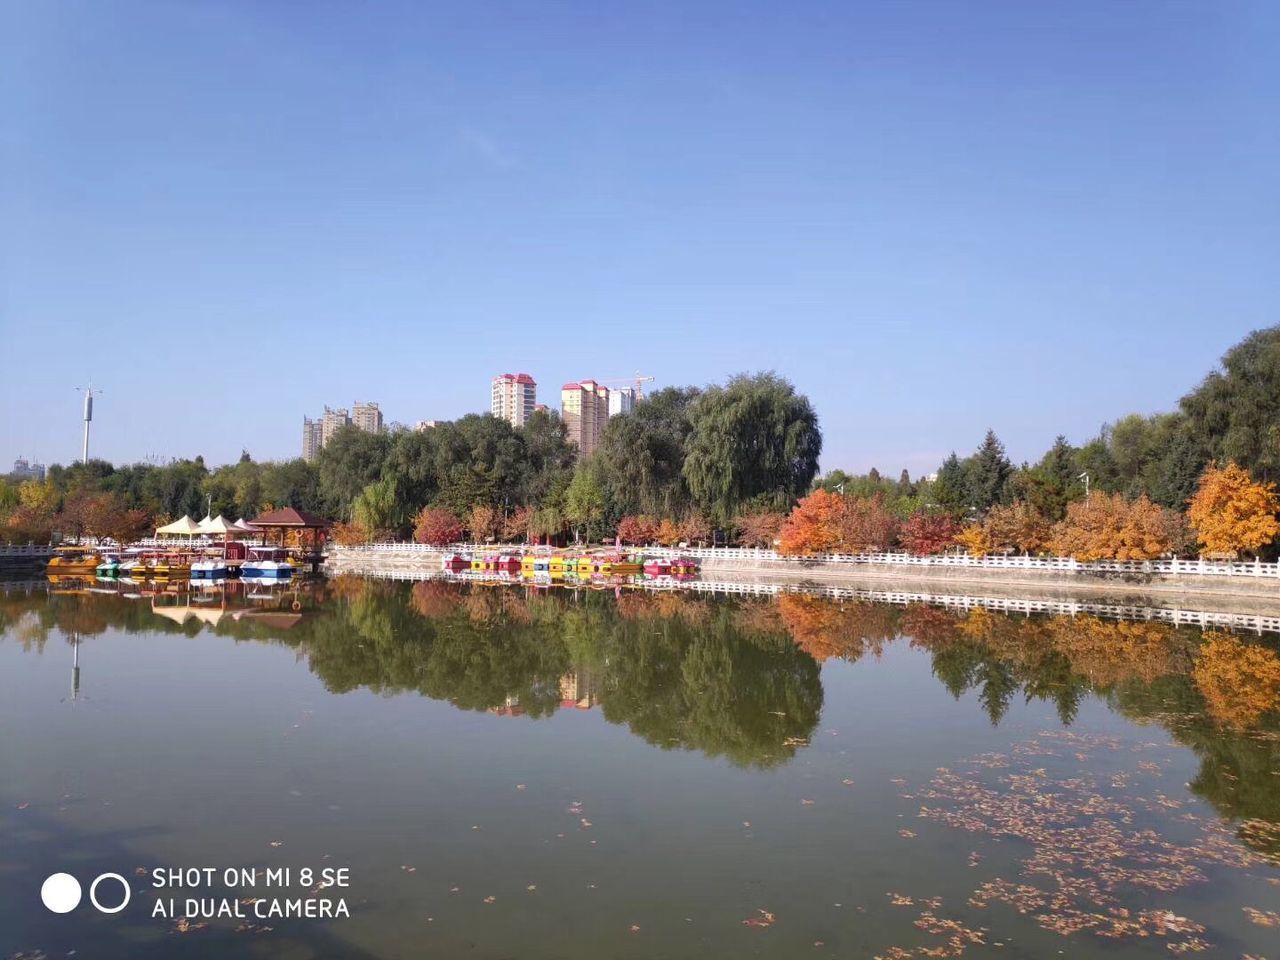 SCENIC VIEW OF LAKE AGAINST BUILDINGS